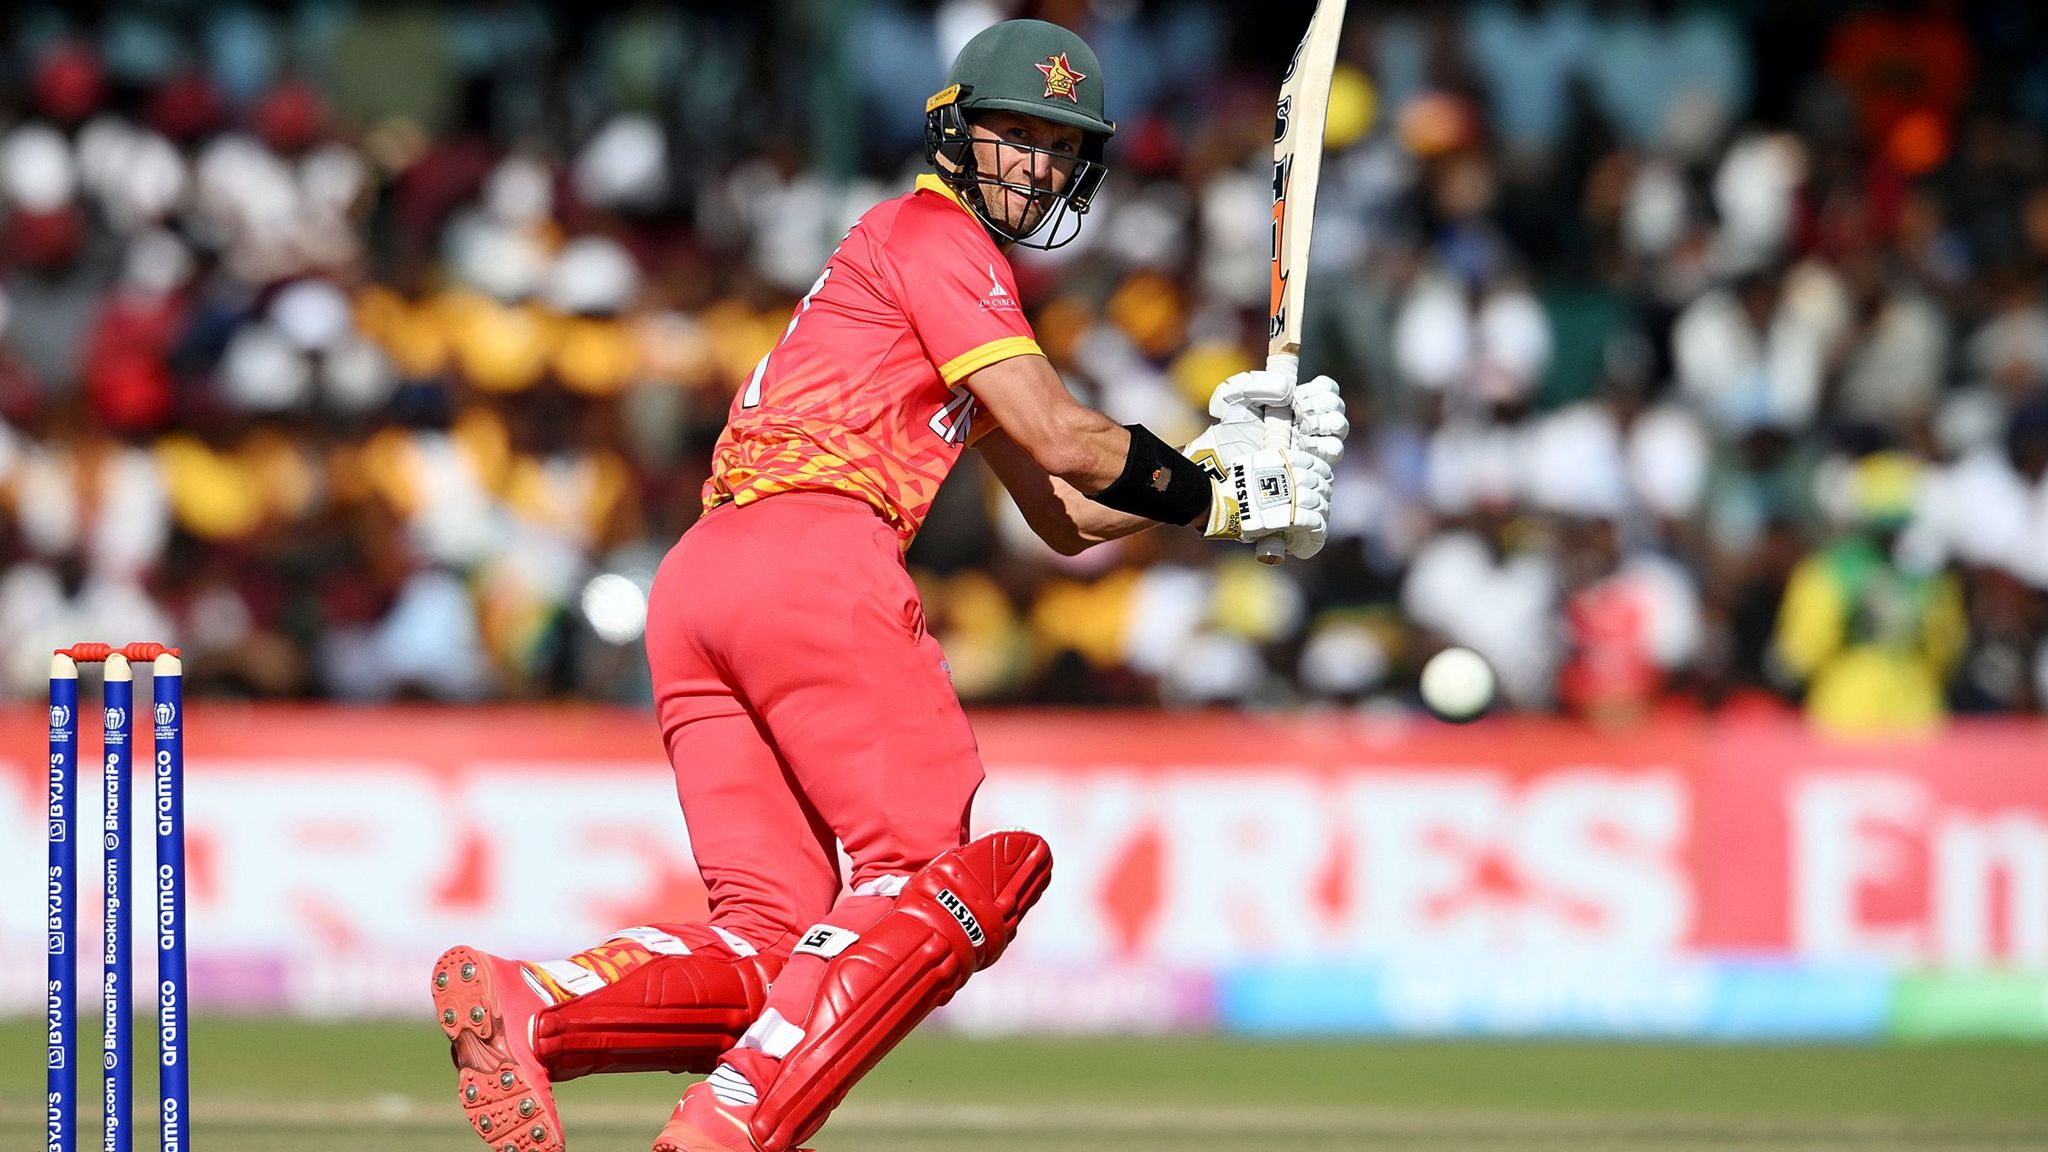 ICC Cricket World Cup Qualifier: Zimbabwe comprehensively beat Nepal by 8 wickets